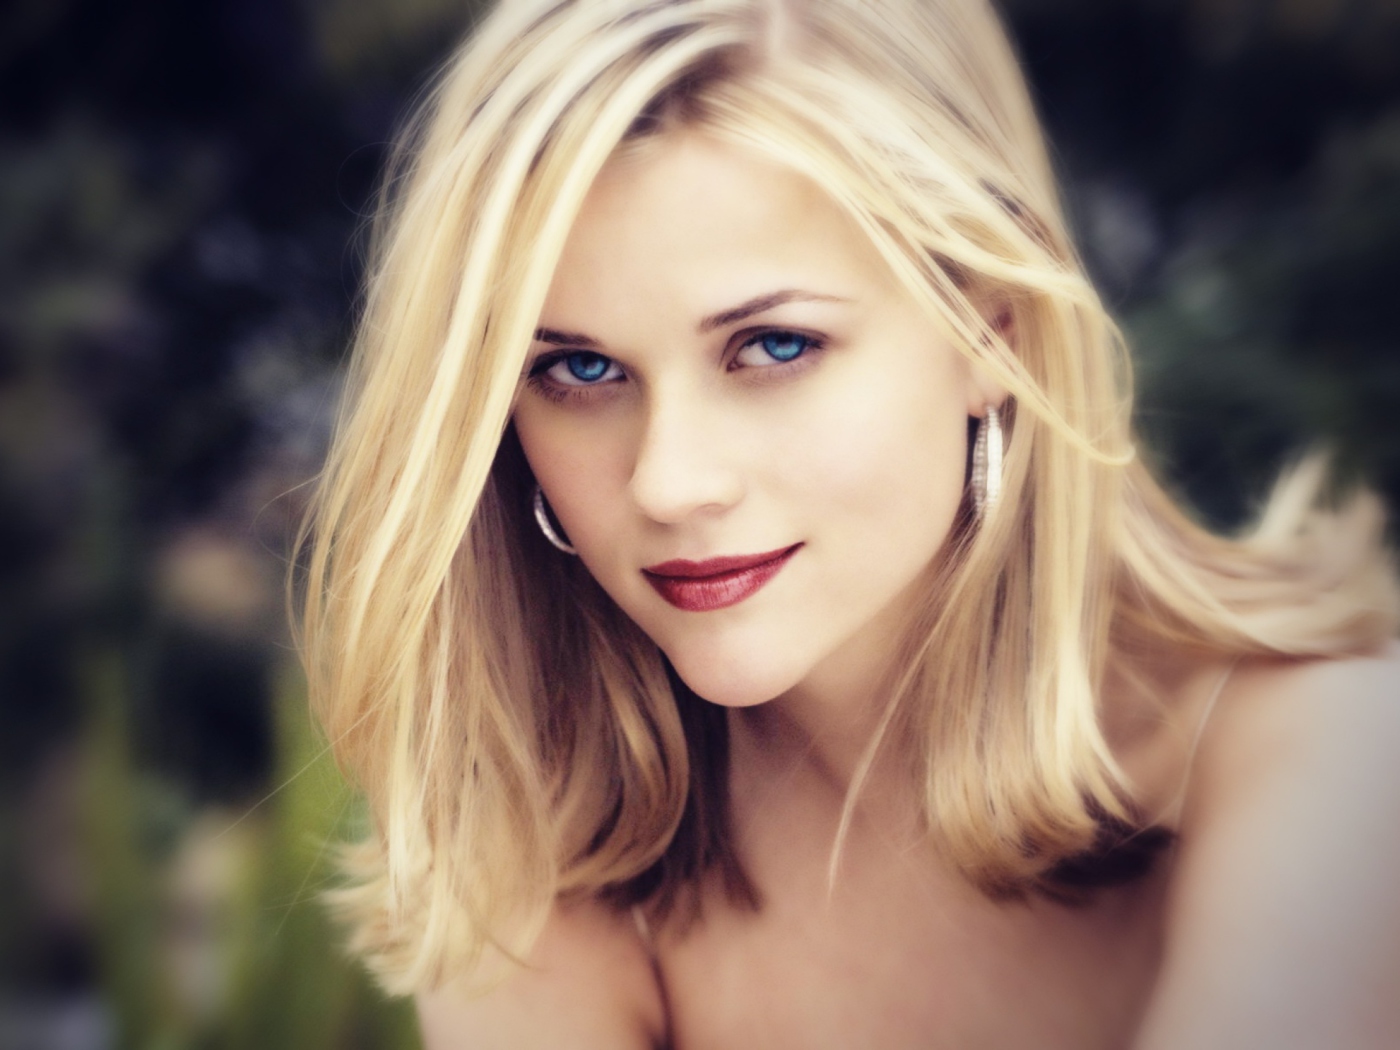 Reese Witherspoon wallpaper 1400x1050